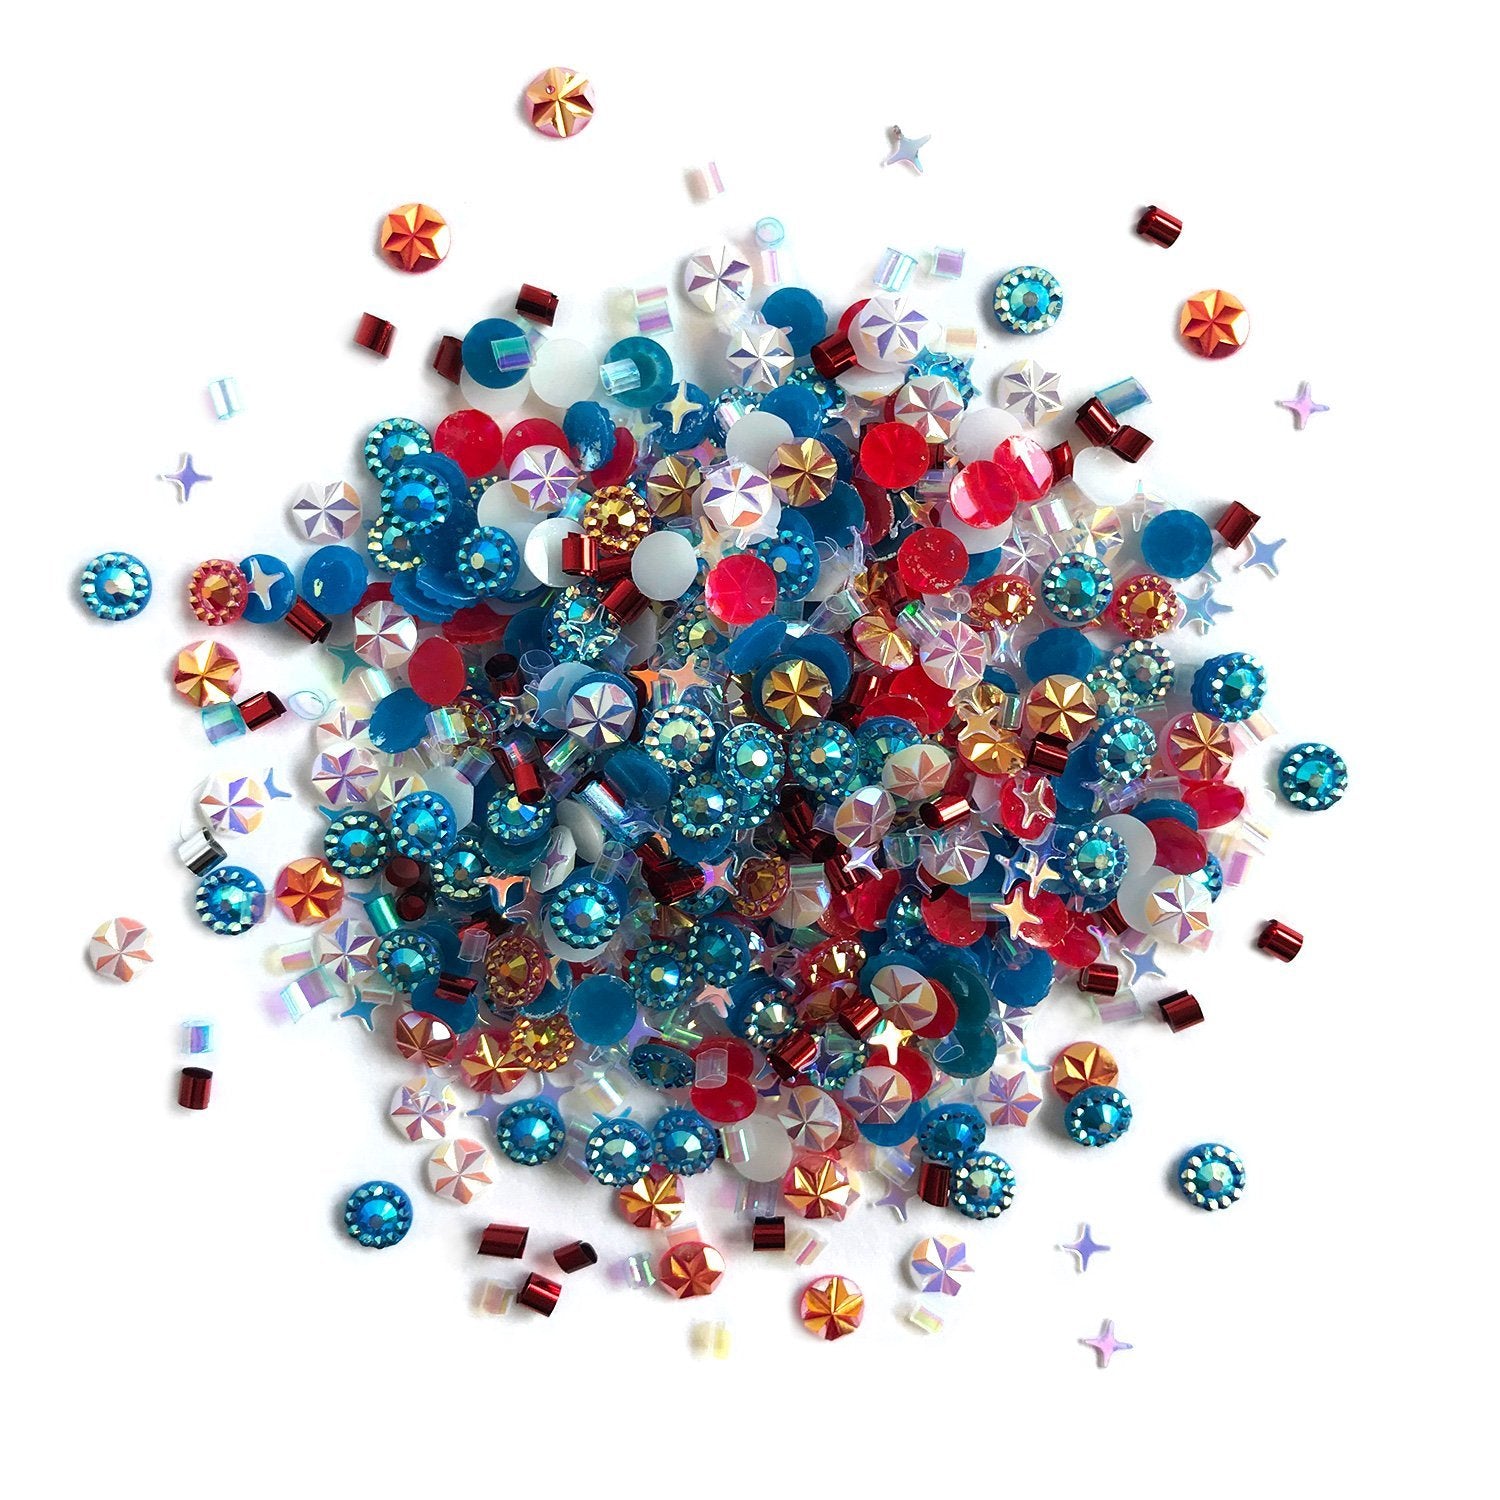 Red & Blue Gems & Jewels for Crafts & Jewelry Making, Buttons Galore